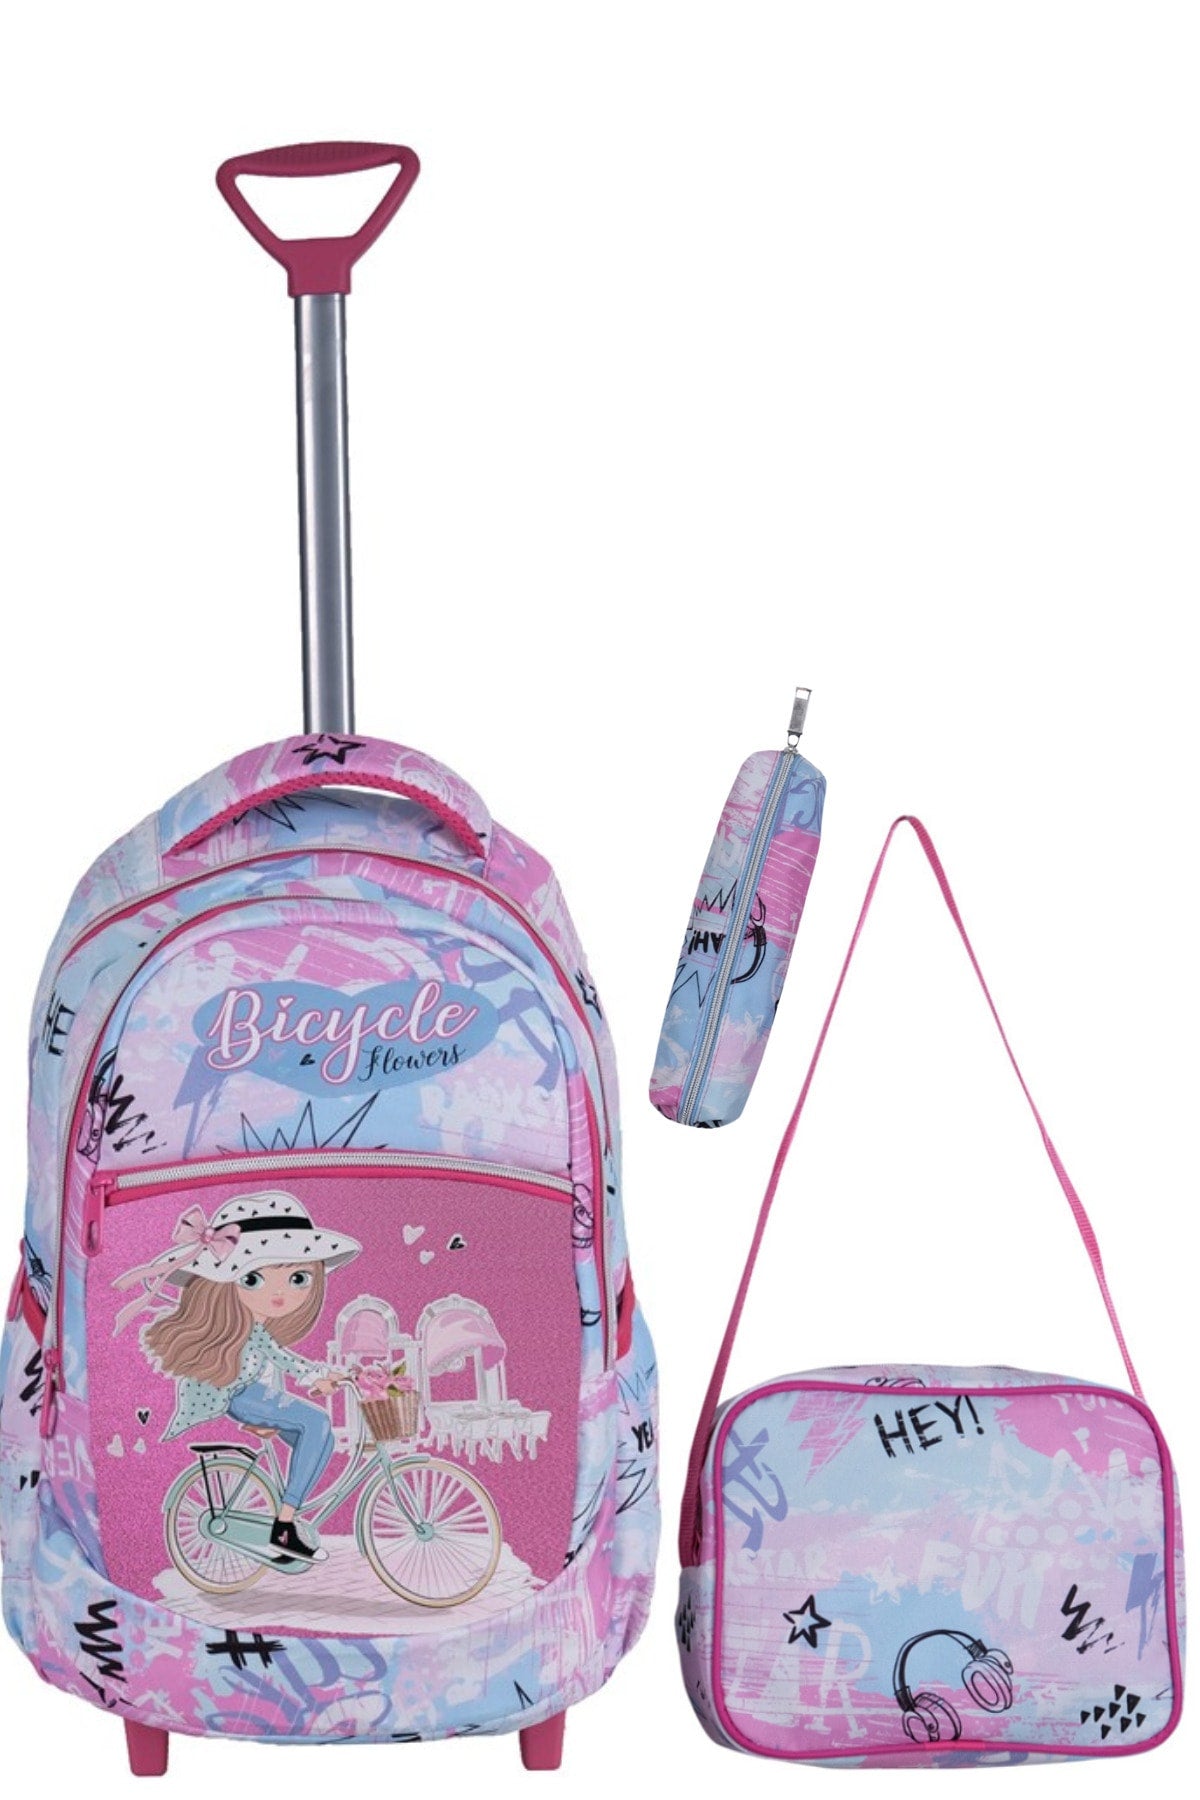 3-pack School Set with Squeegee, Color Patterned Primary School Bag + Lunch Box + Pencil Holder